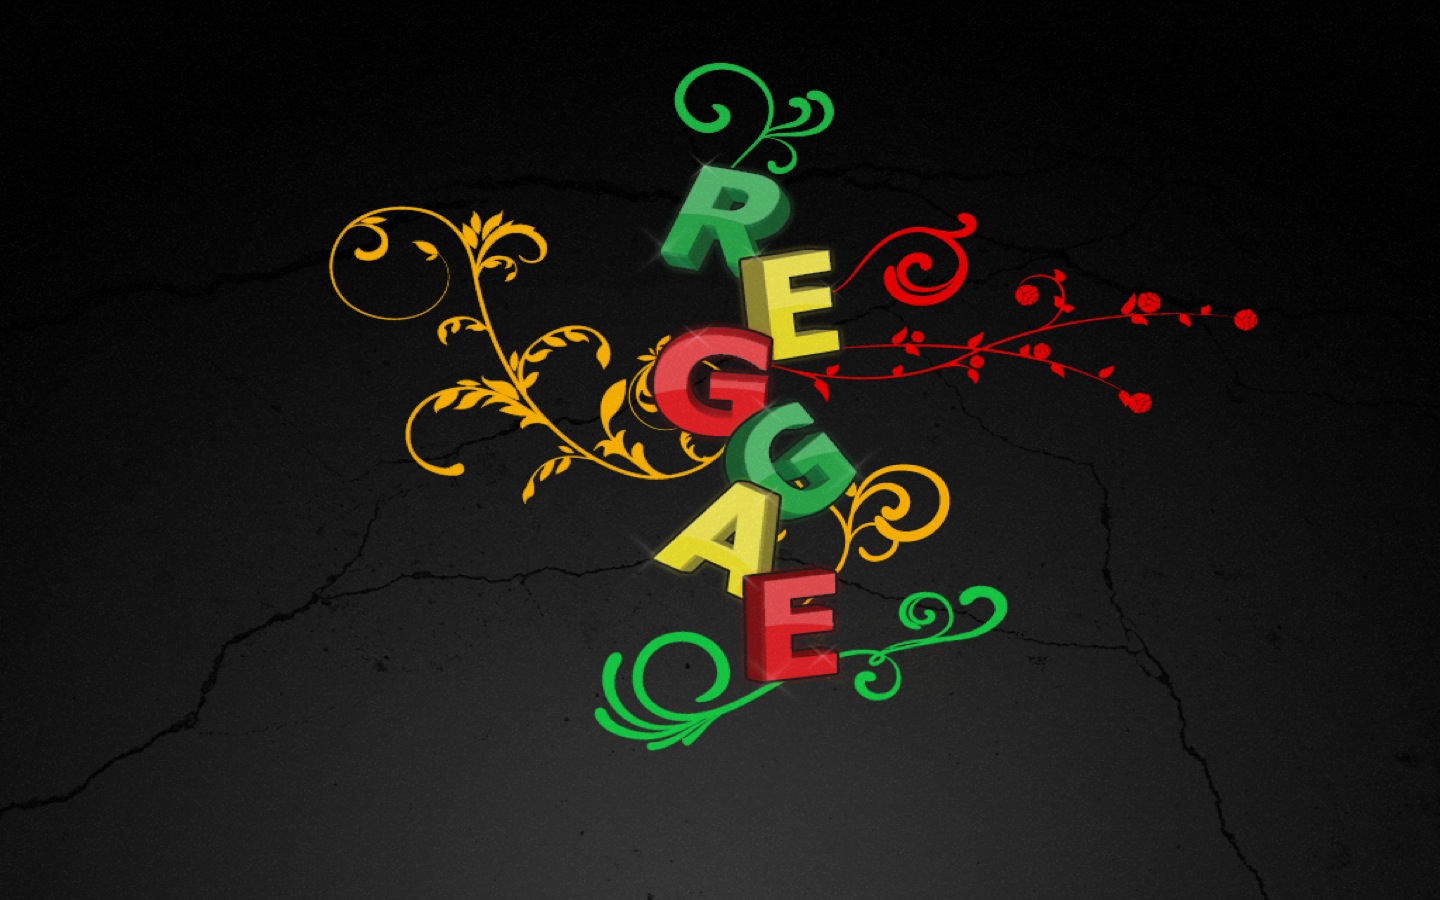 Cool Rasta Backgrounds Related Keywords amp Suggestions